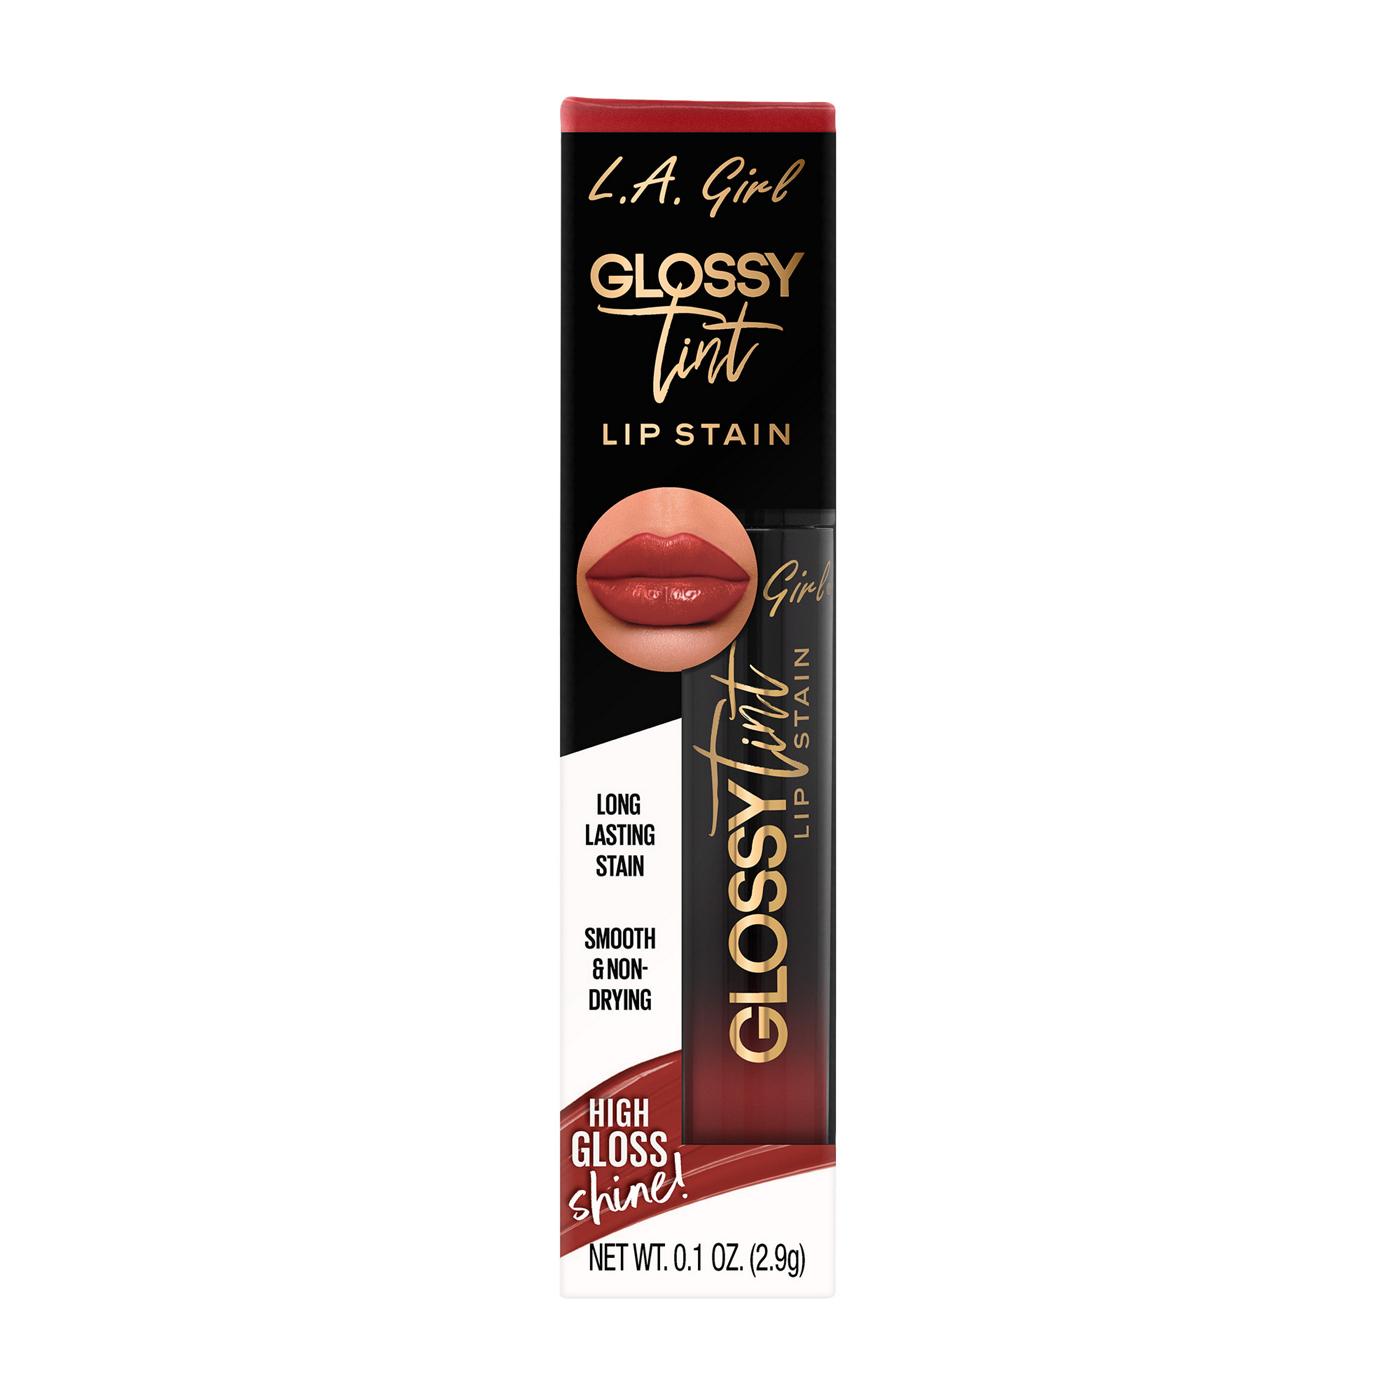 L.A. Girl Glossy Tint Lip Stain Adored; image 1 of 2